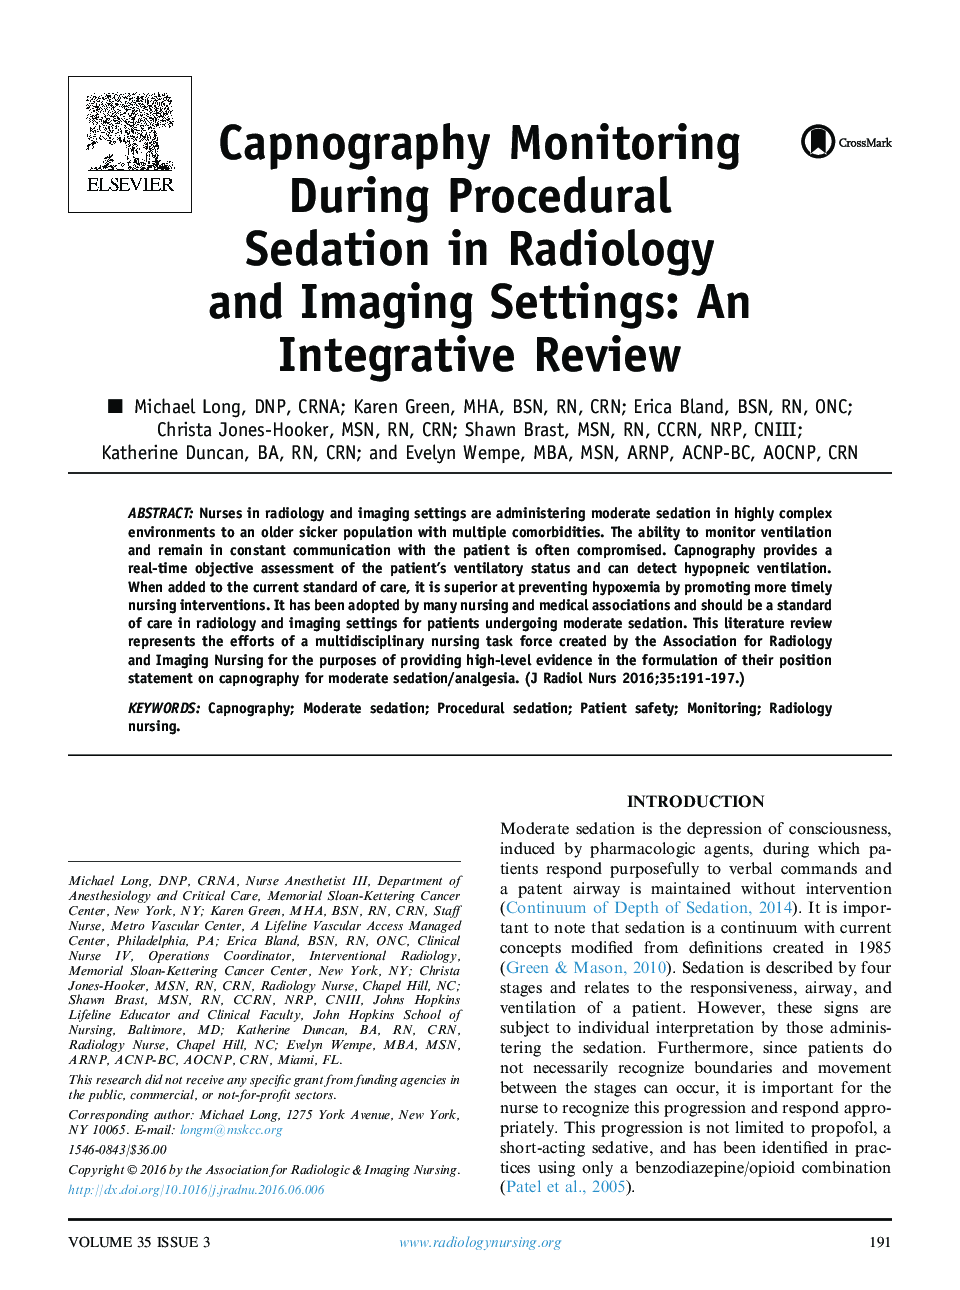 Capnography Monitoring During Procedural Sedation in Radiology and Imaging Settings: An Integrative Review 